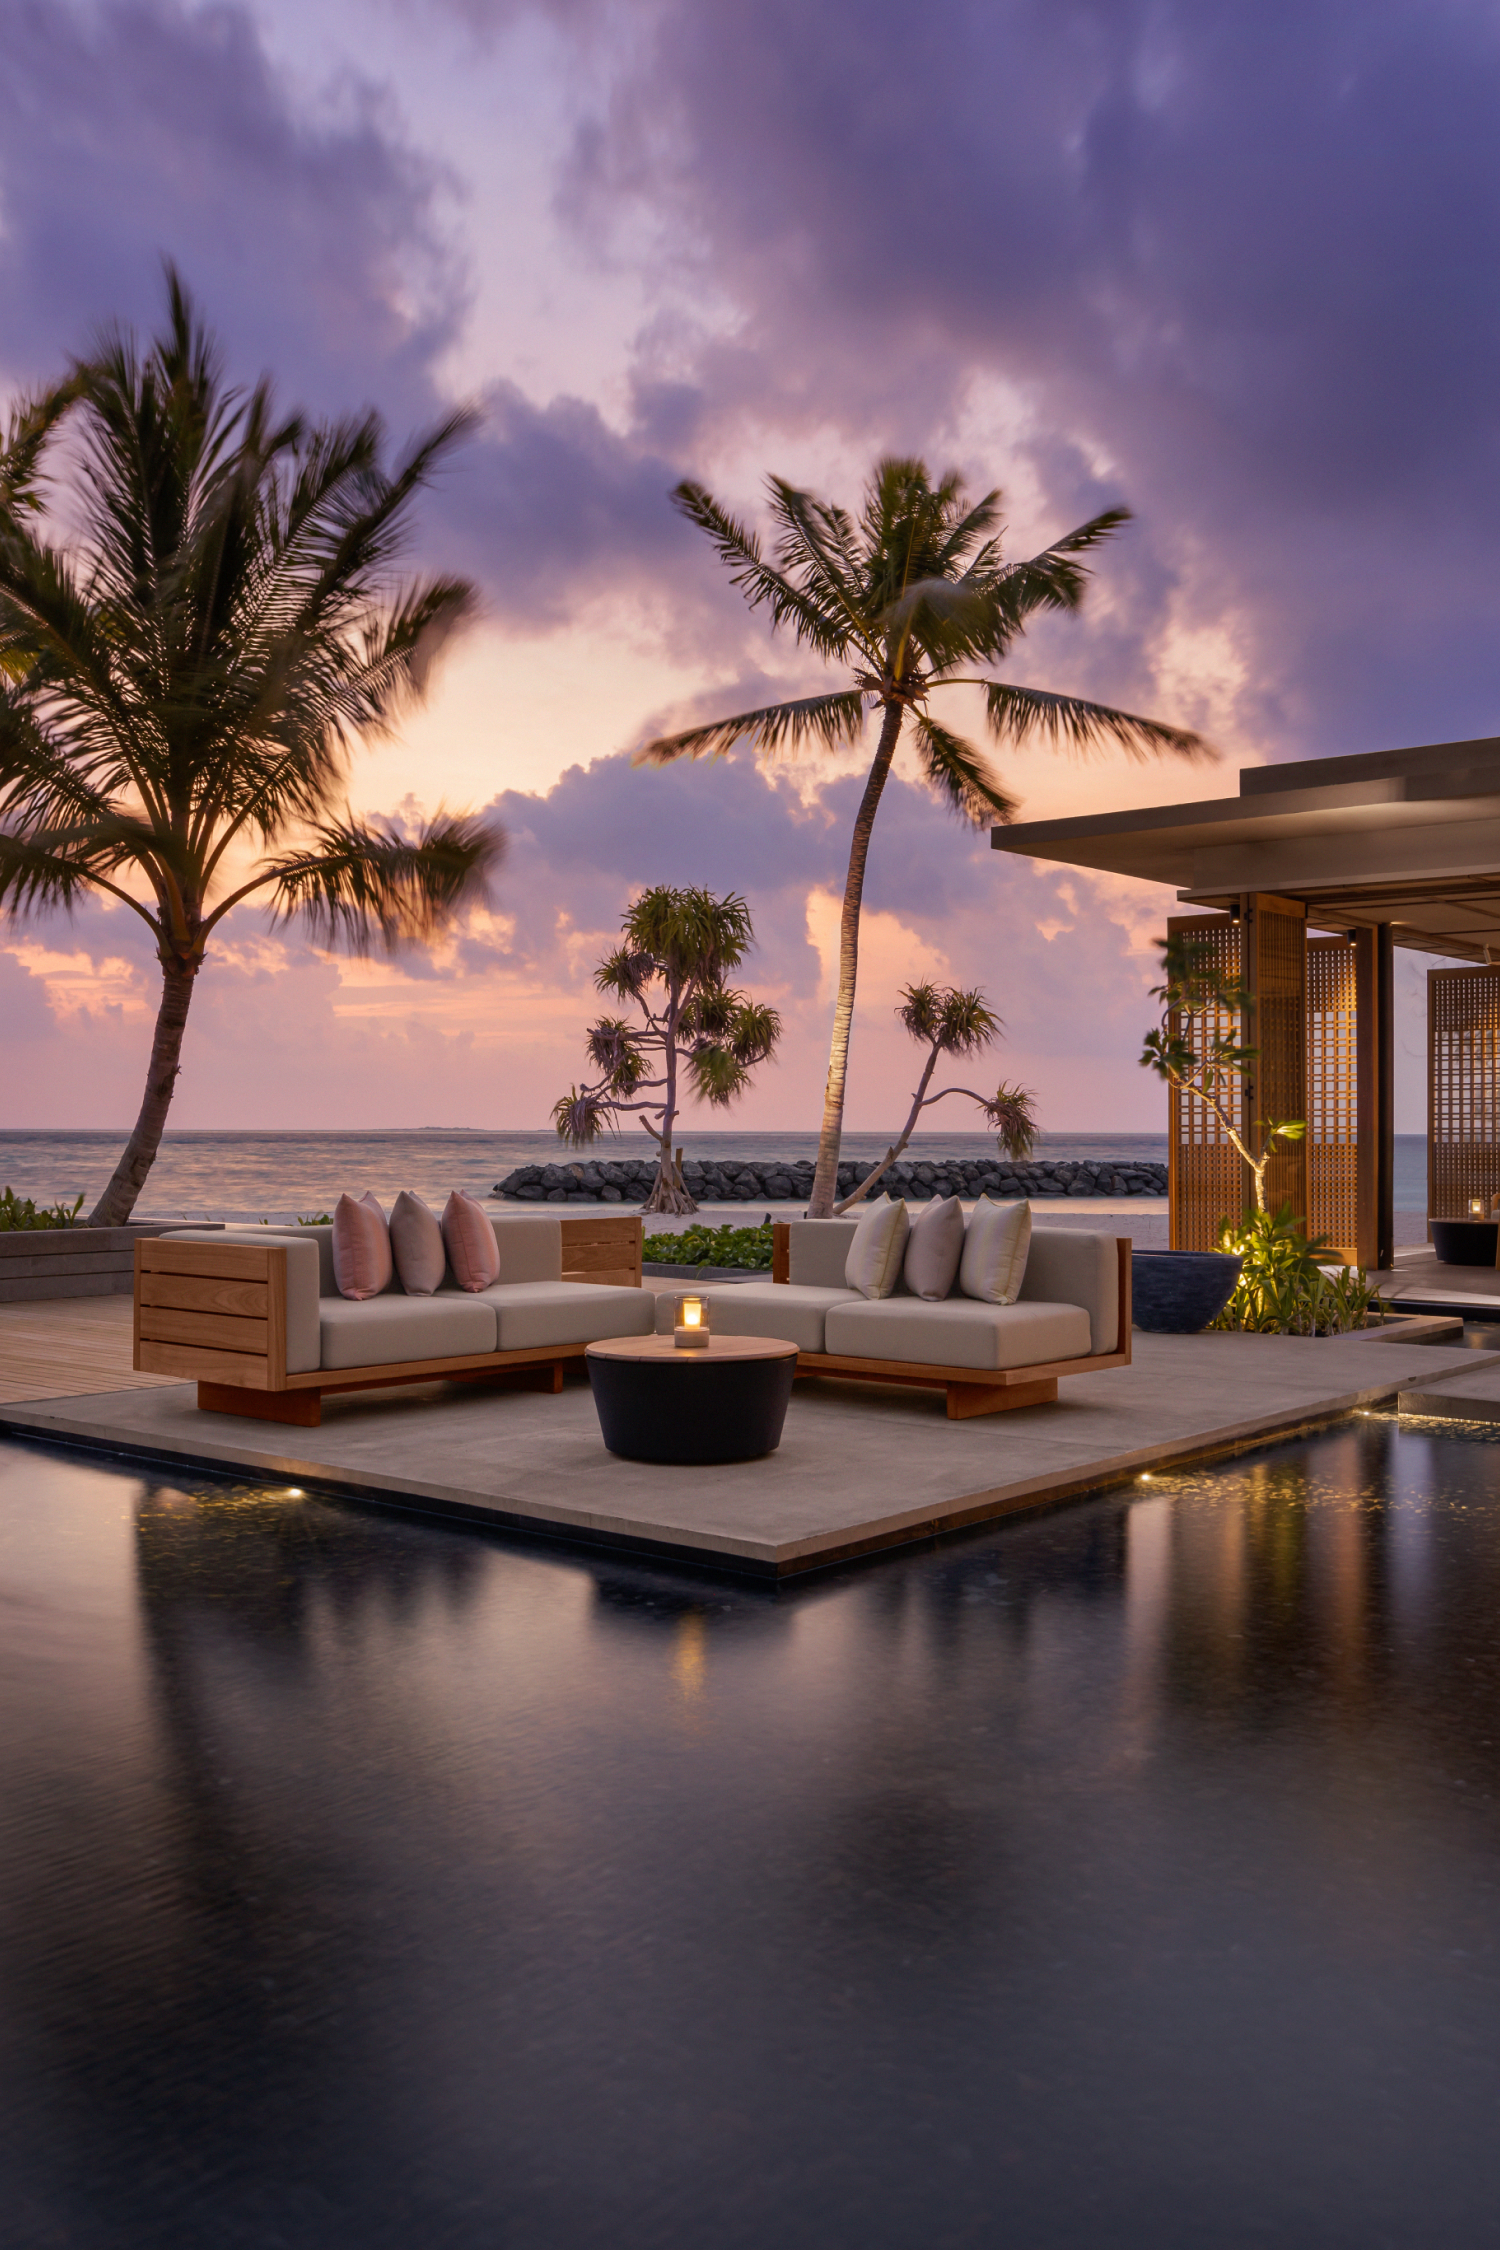 Lounge area by pool at sunset